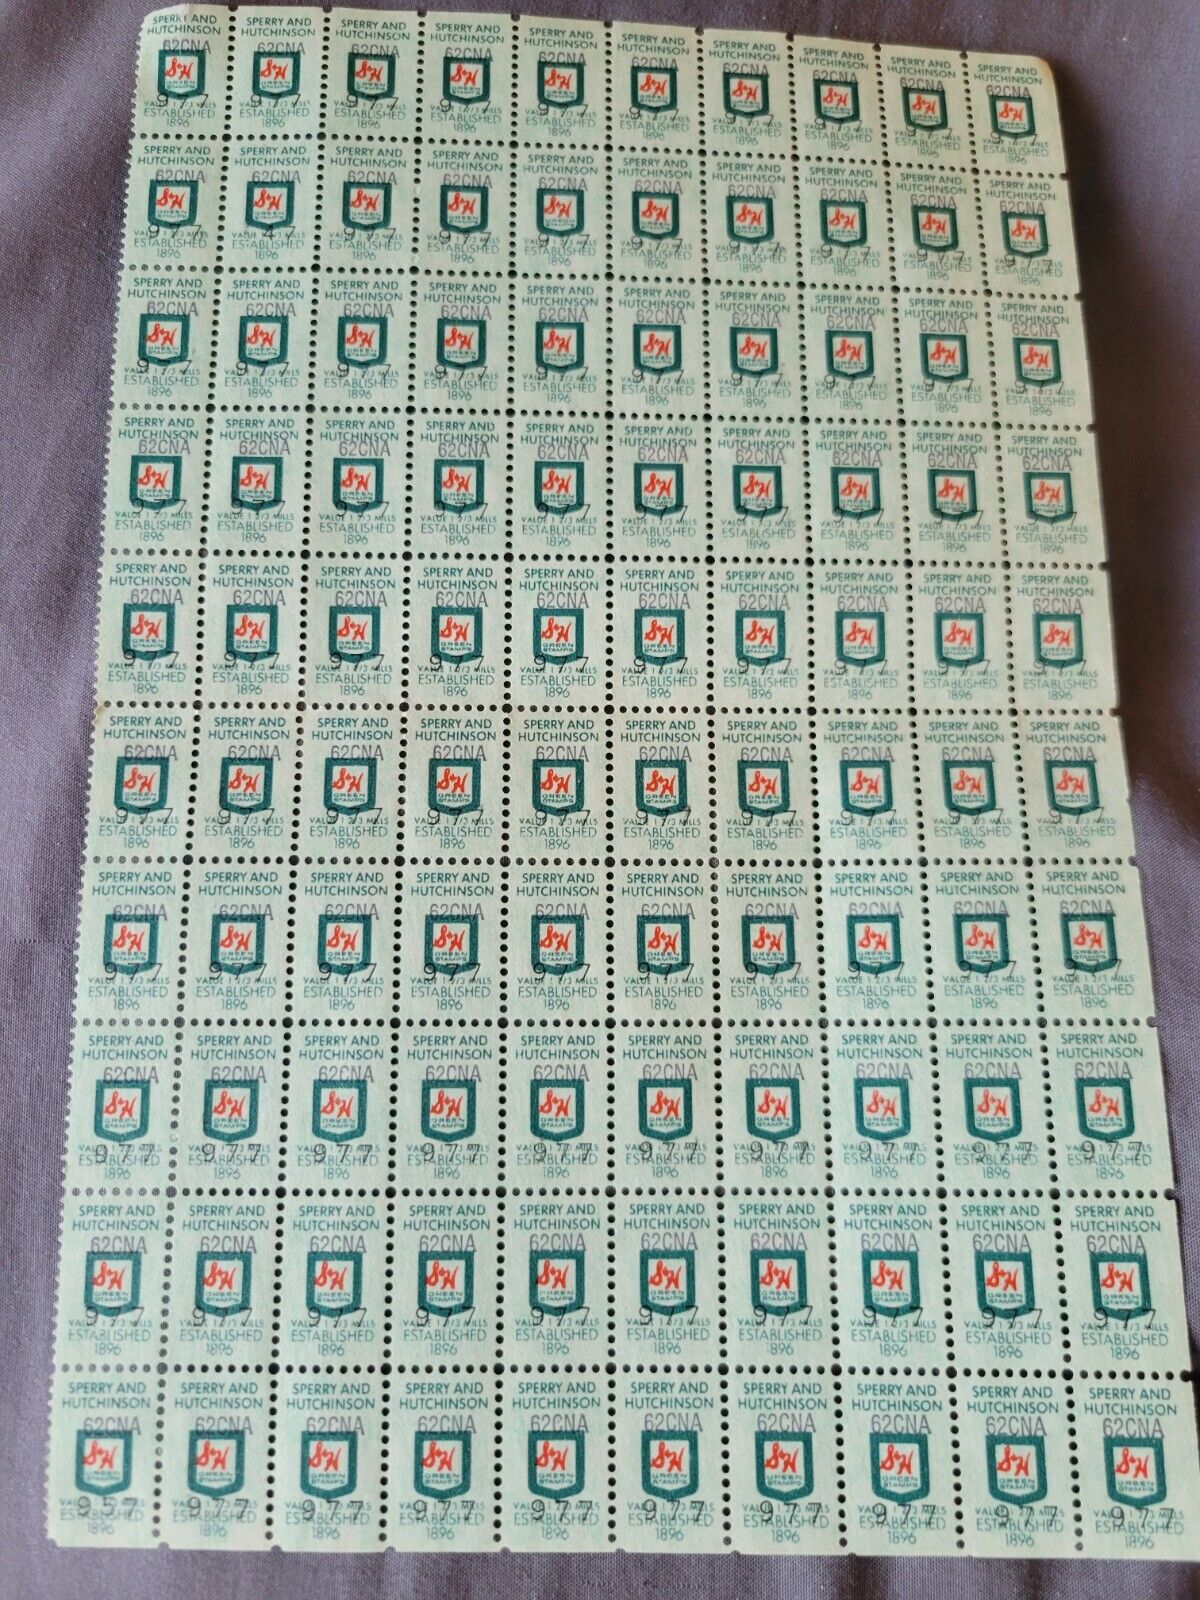 Sherry And Hutchinson Stamp sheet from 1969 in EX/MINT condition 